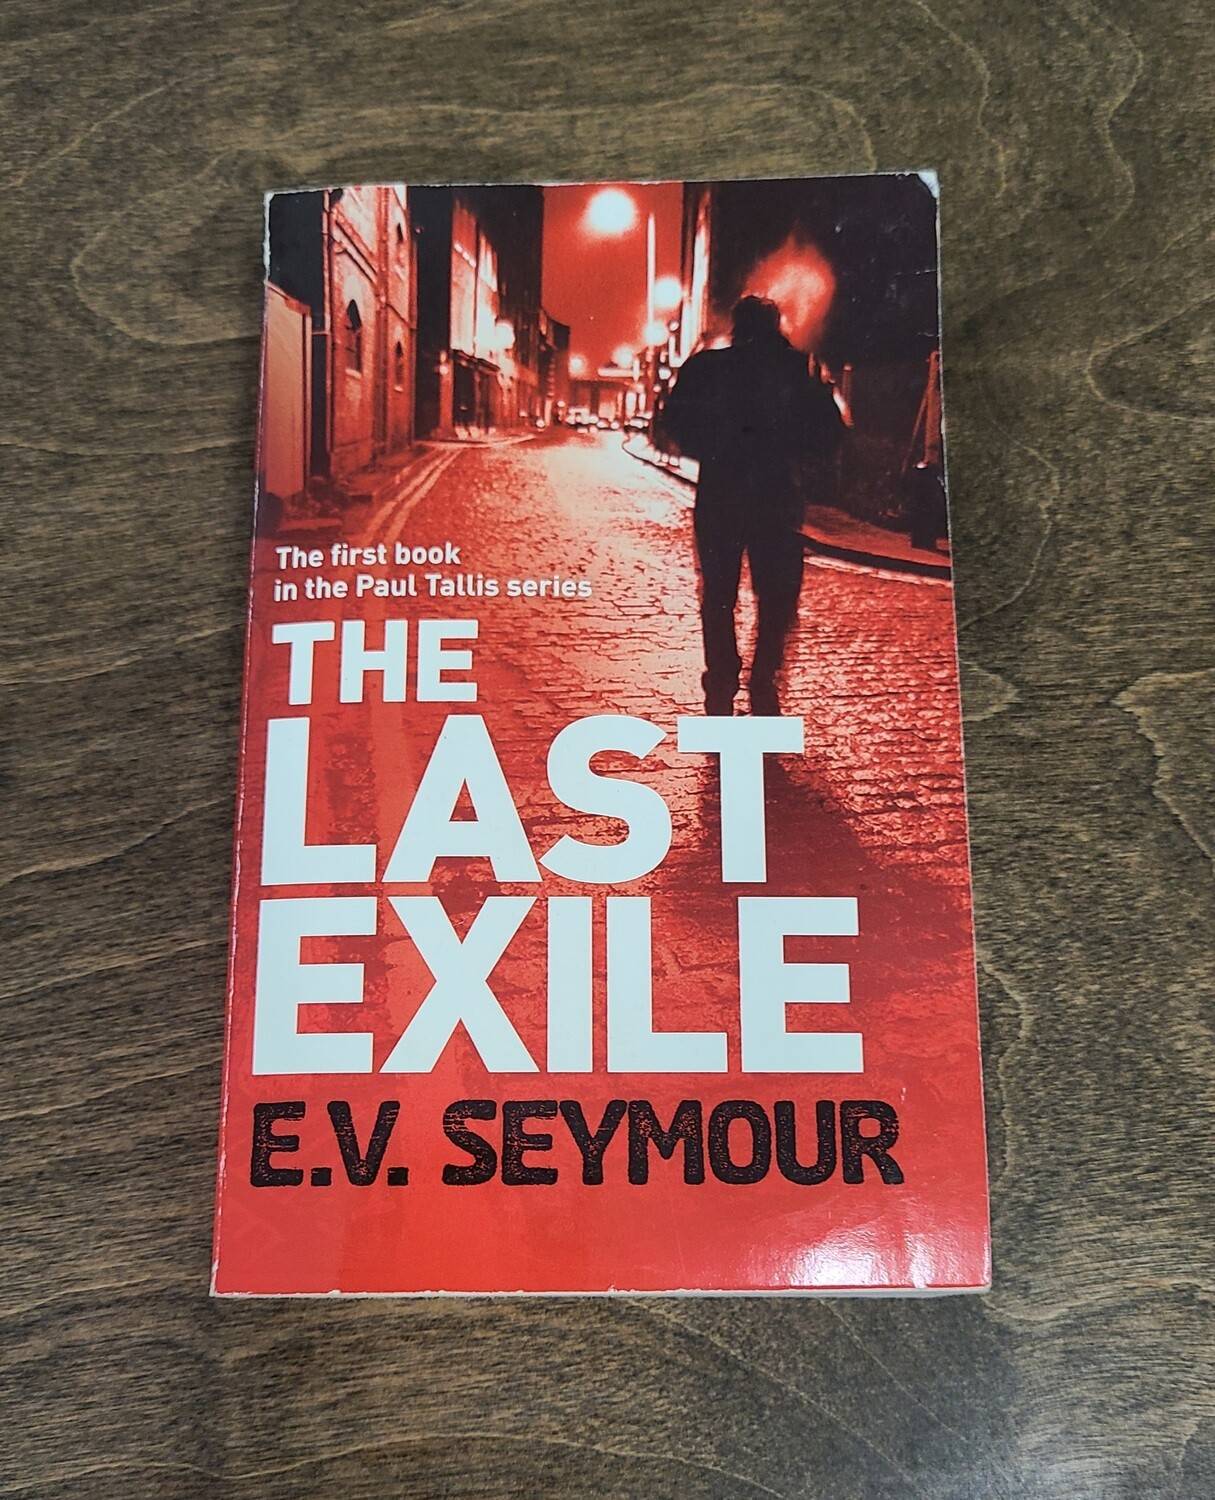 The Last Exile by E.V. Seymour